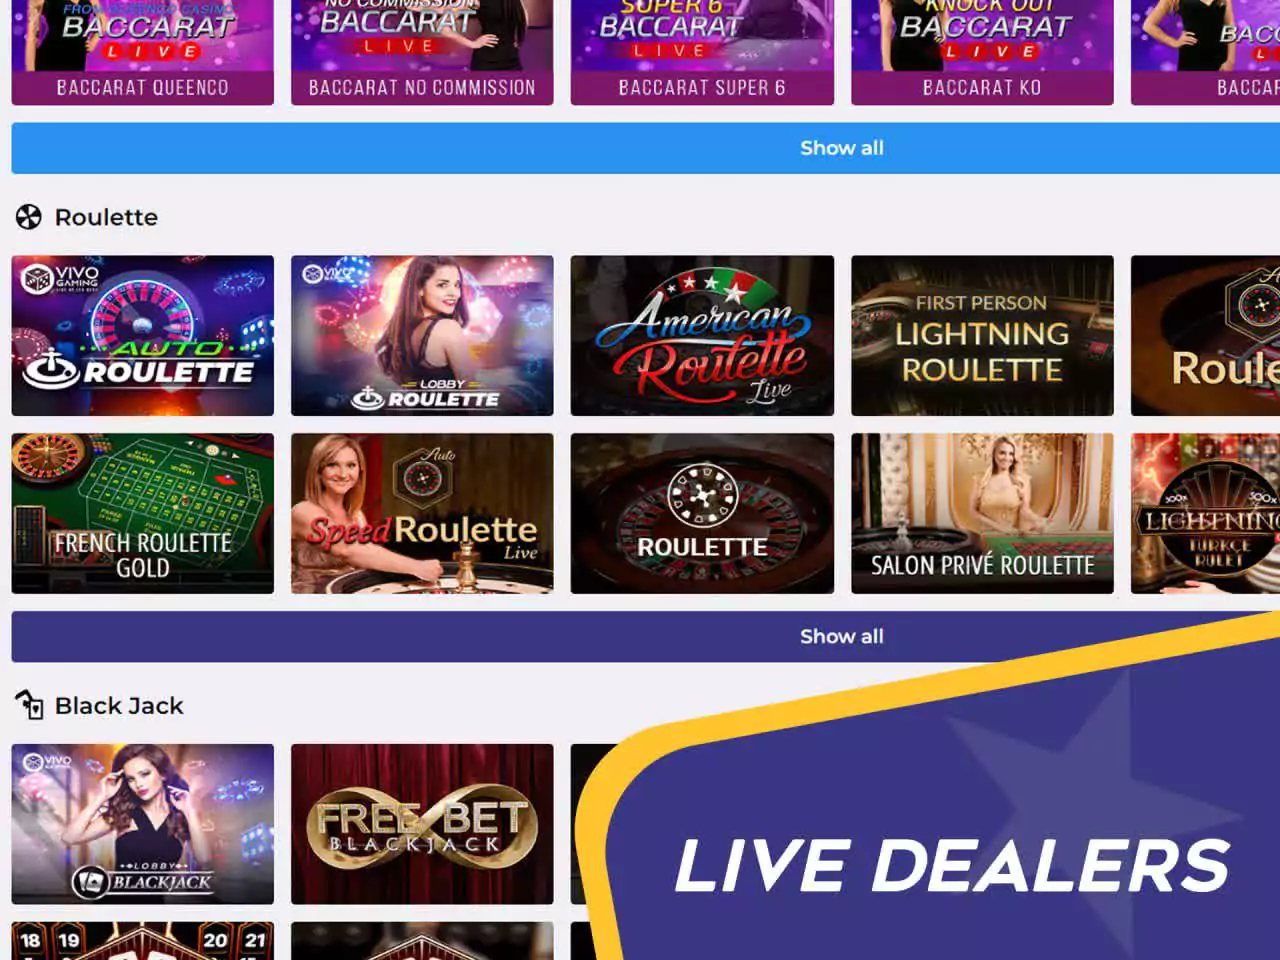 Play against the real dealers in the live casino section.